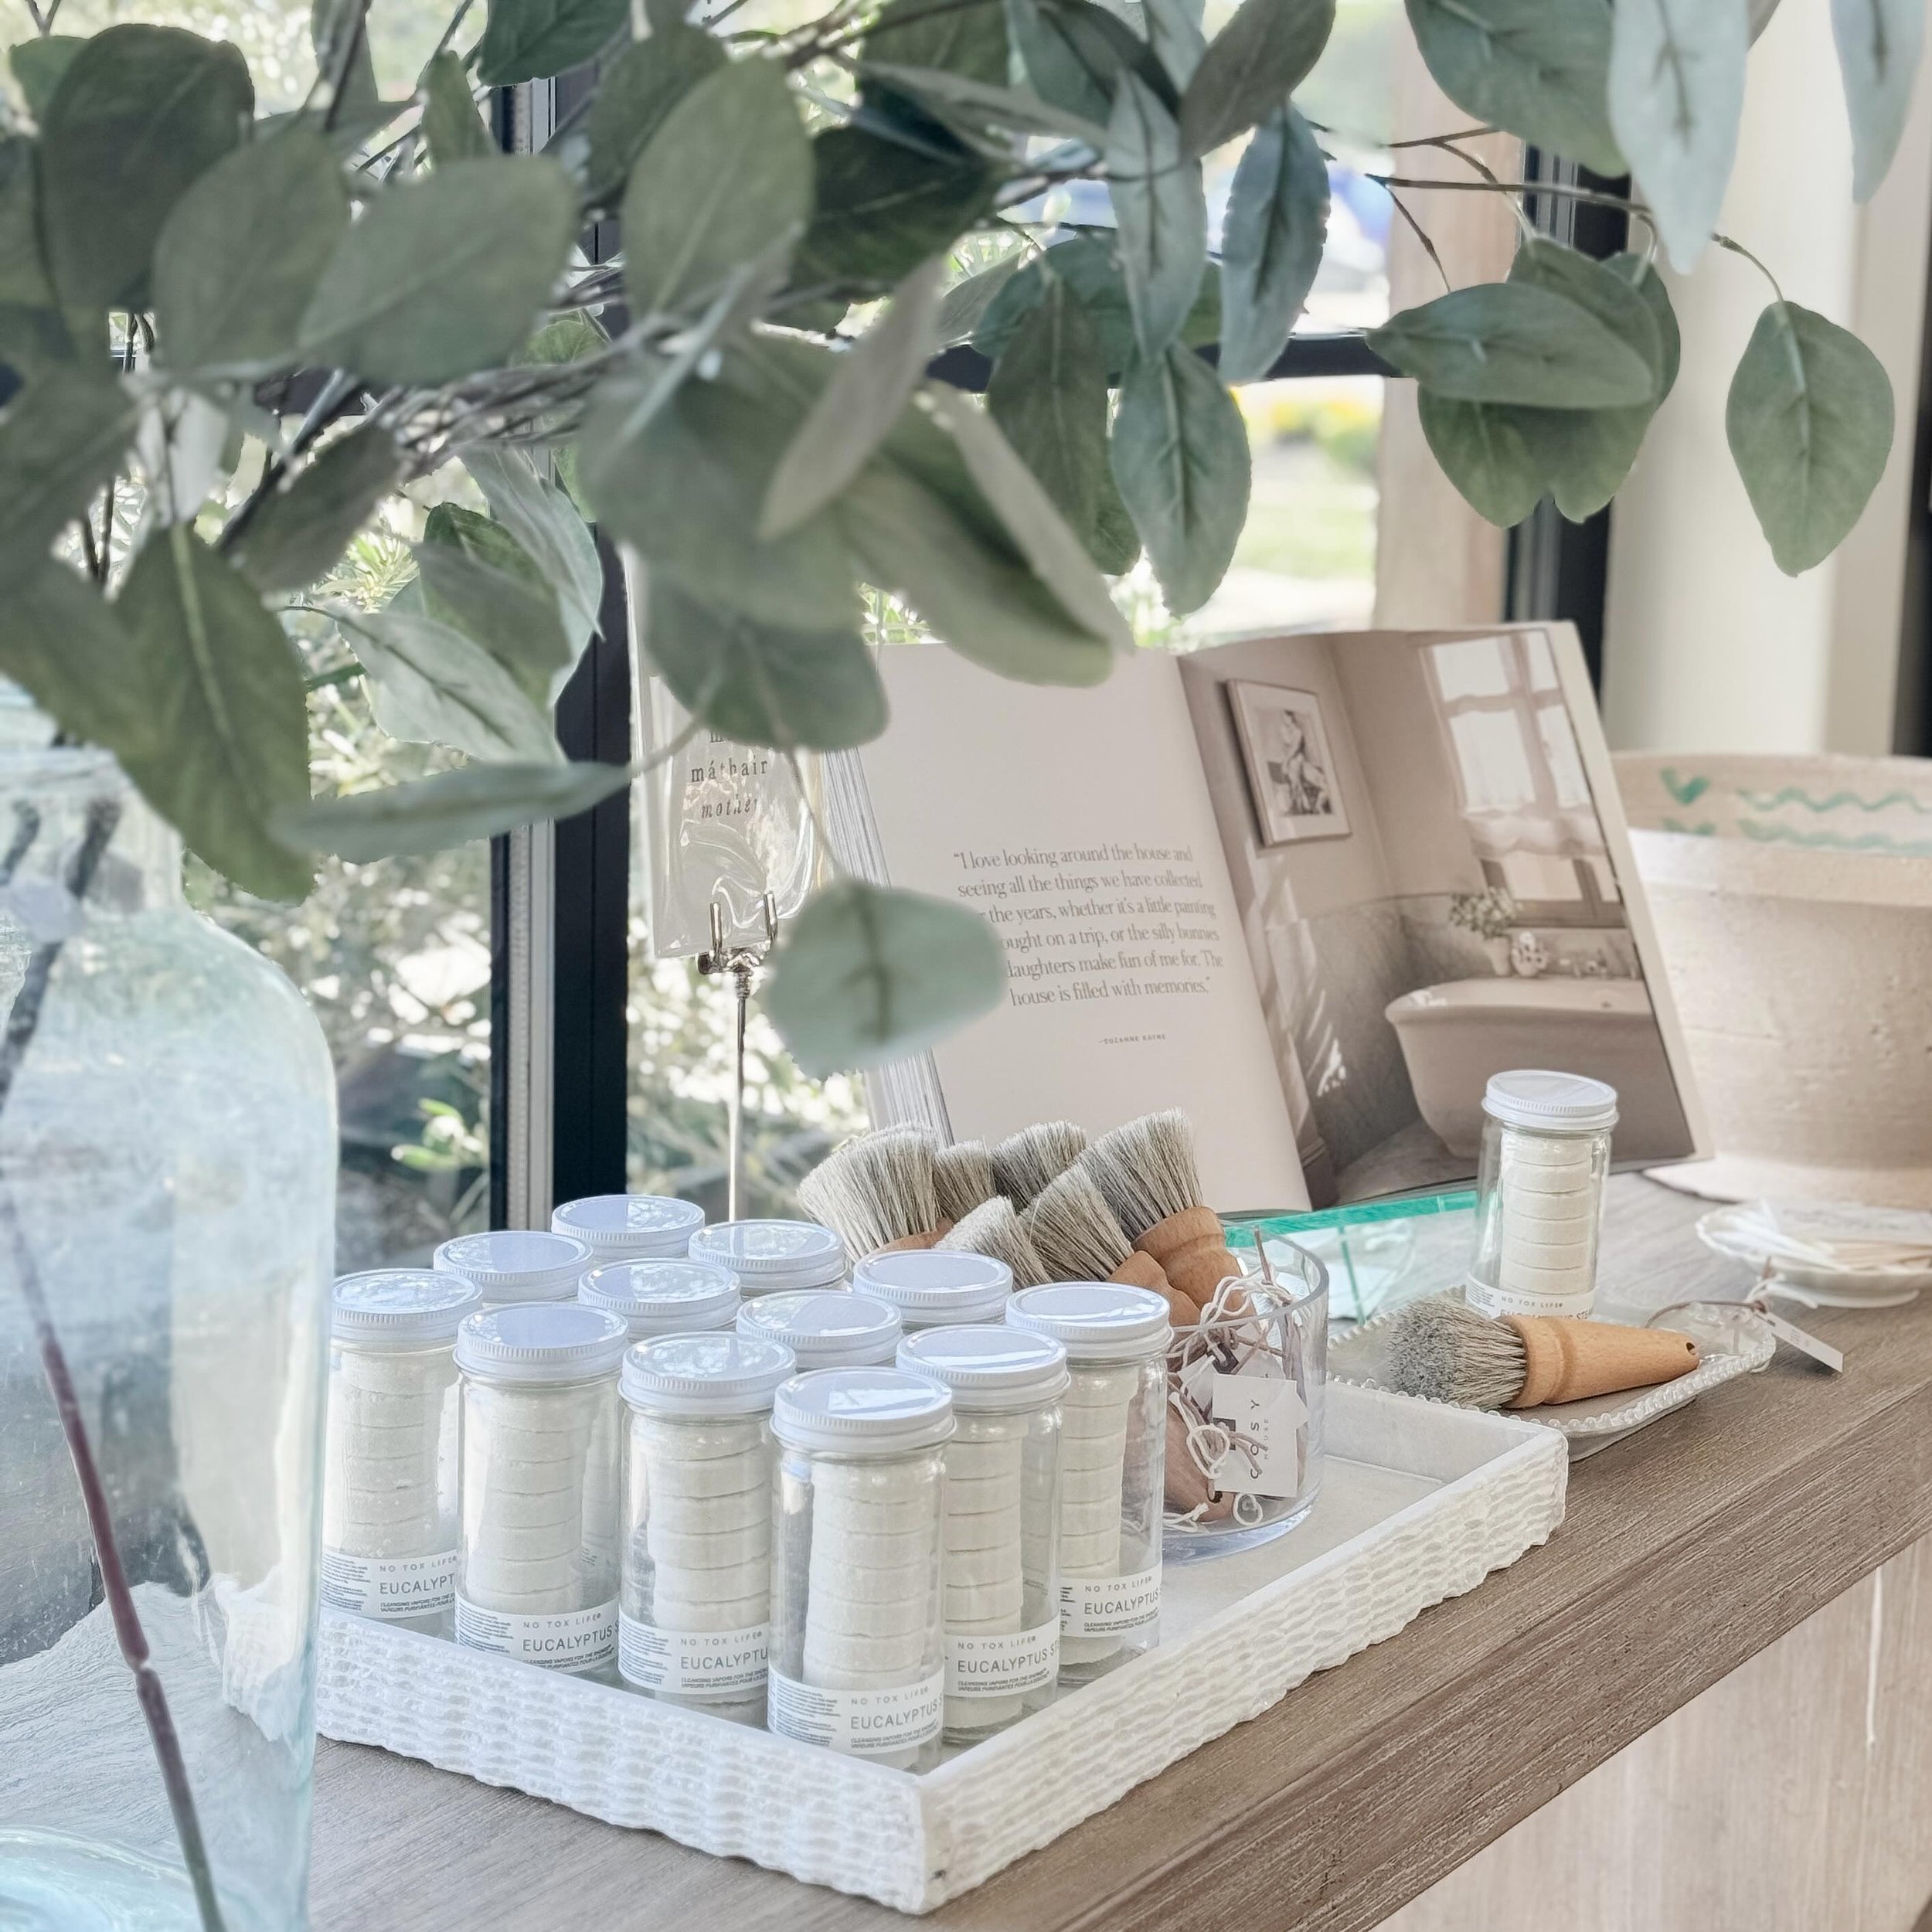 Mother&rsquo;s Day is coming up and we have great gift ideas! One of our favorites are these👆🏼All-Natural Eucalyptus Shower Steamers! We love pairing them with fresh eucalyptus🌿for a total spa experience in your own bathroom! 
We&rsquo;re open Mon